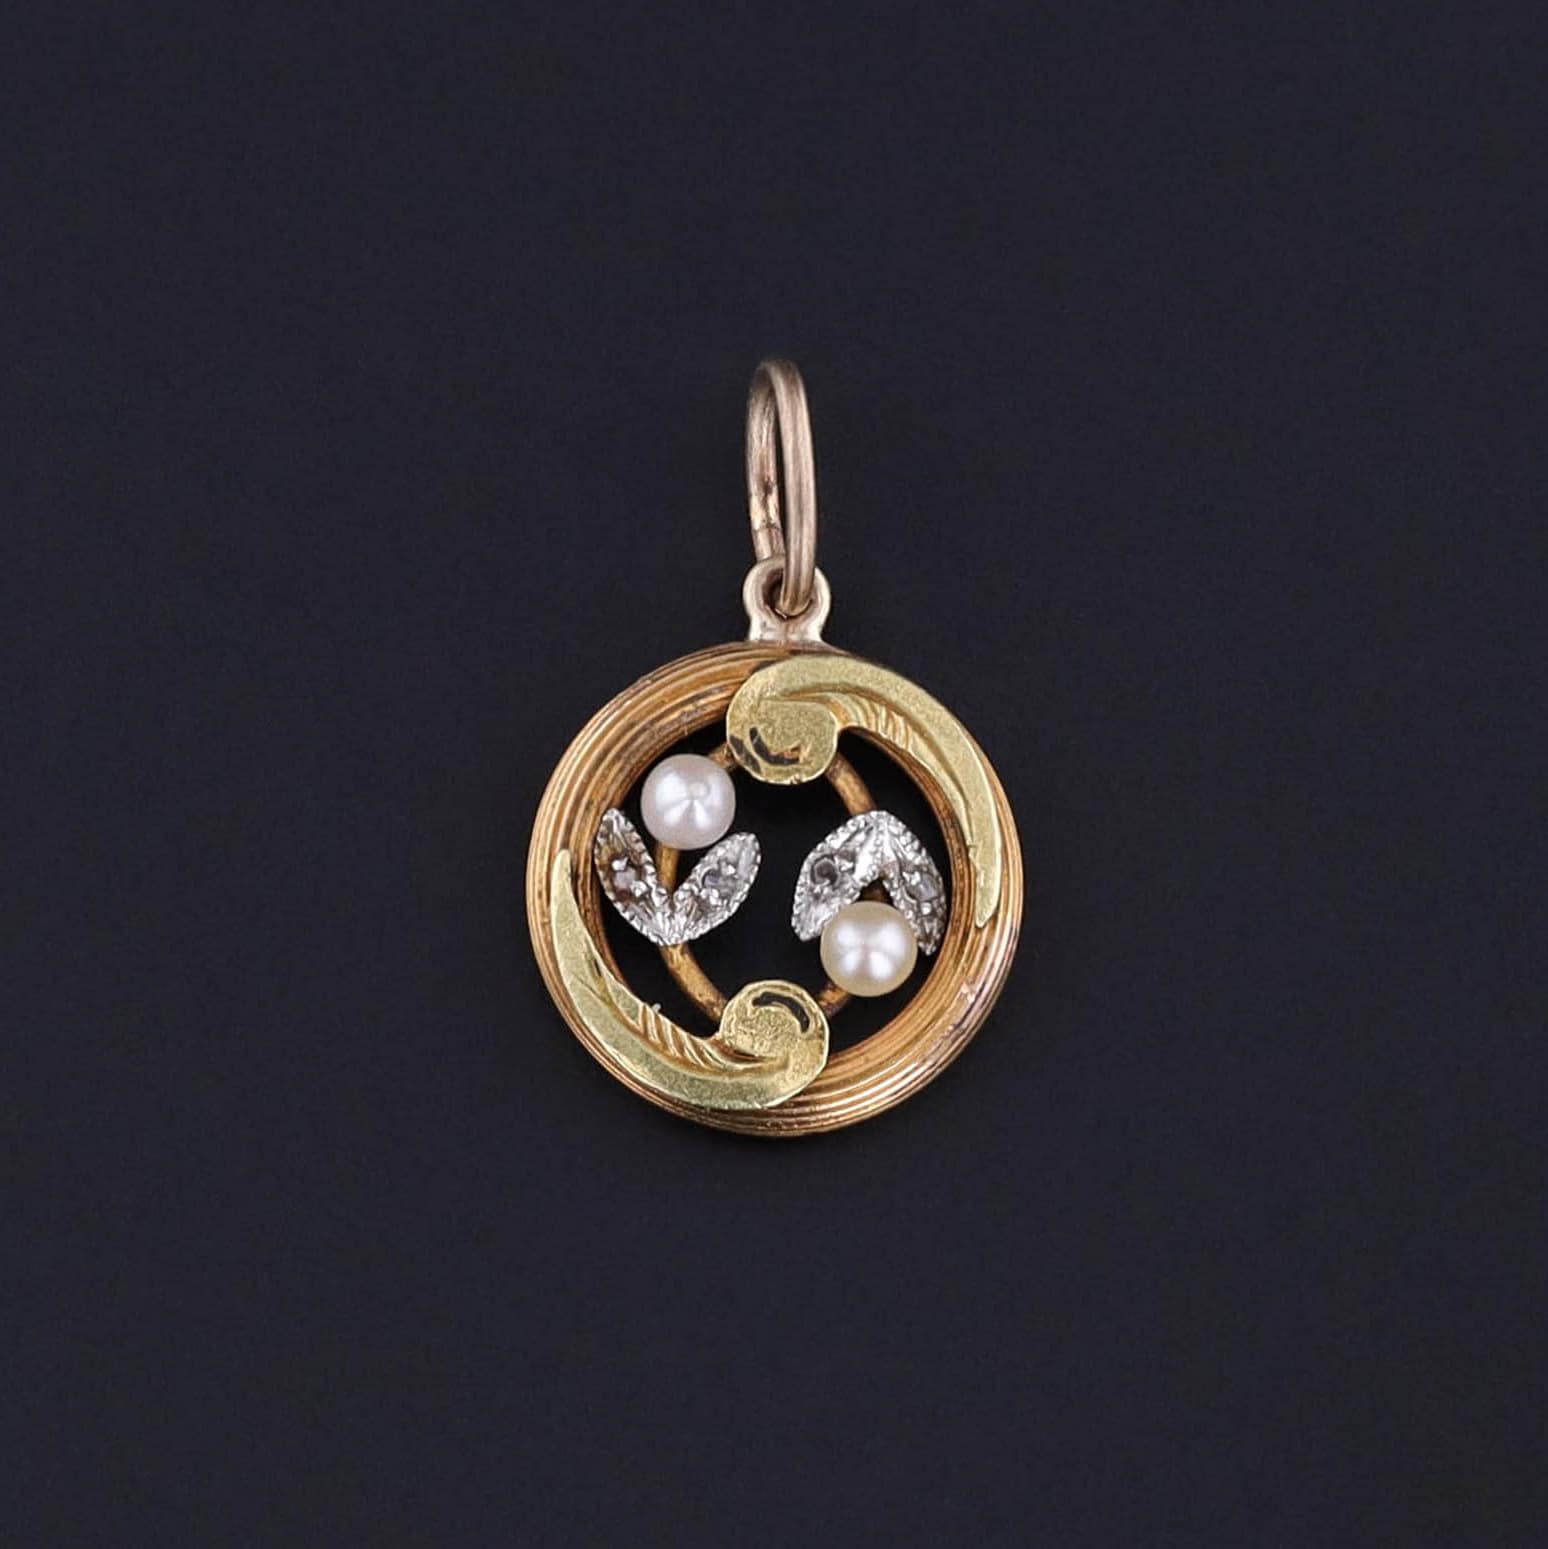 Add a pop of old world style to any ensemble with this petite floral charm featuring rose cut diamonds and pearls. Originally an 18k gold stickpin from the turn of the 20th century, our skilled jeweler transformed it by adding a bail.